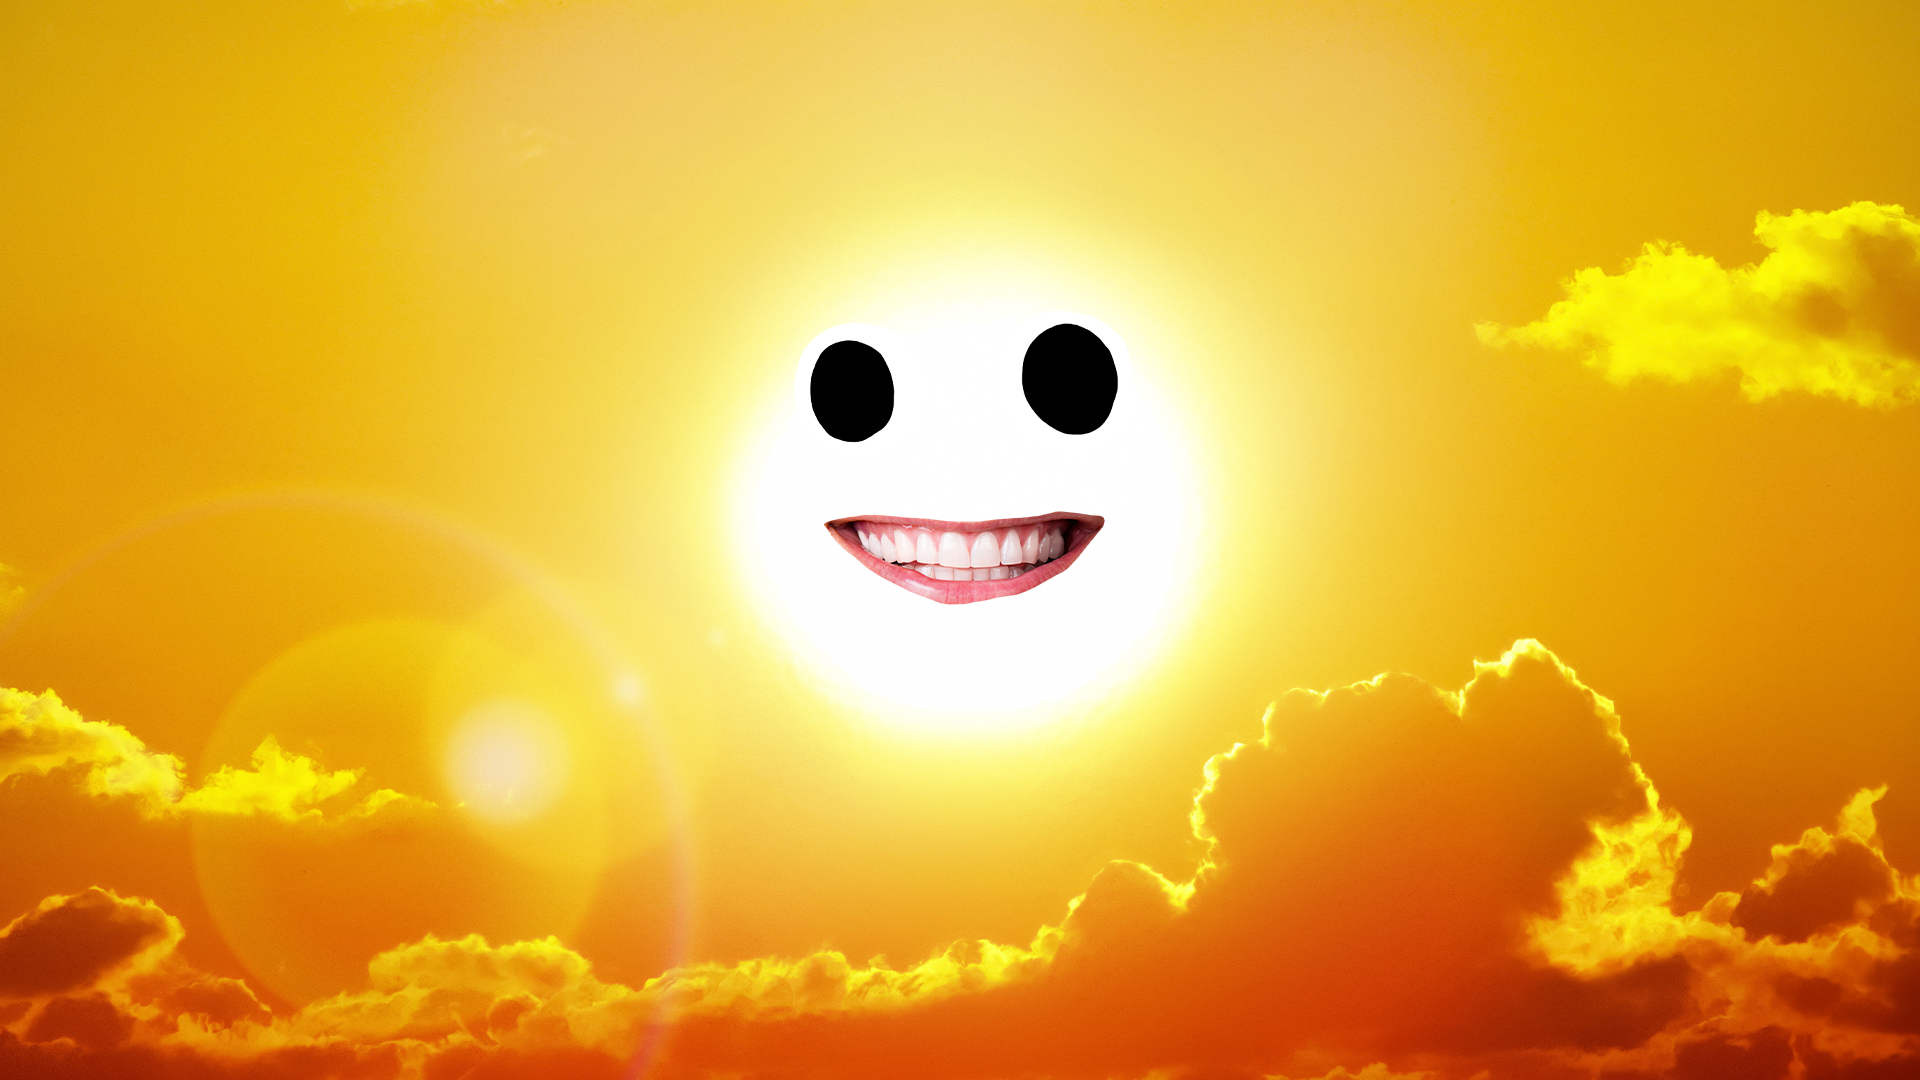 Sun in clouds with goofy face